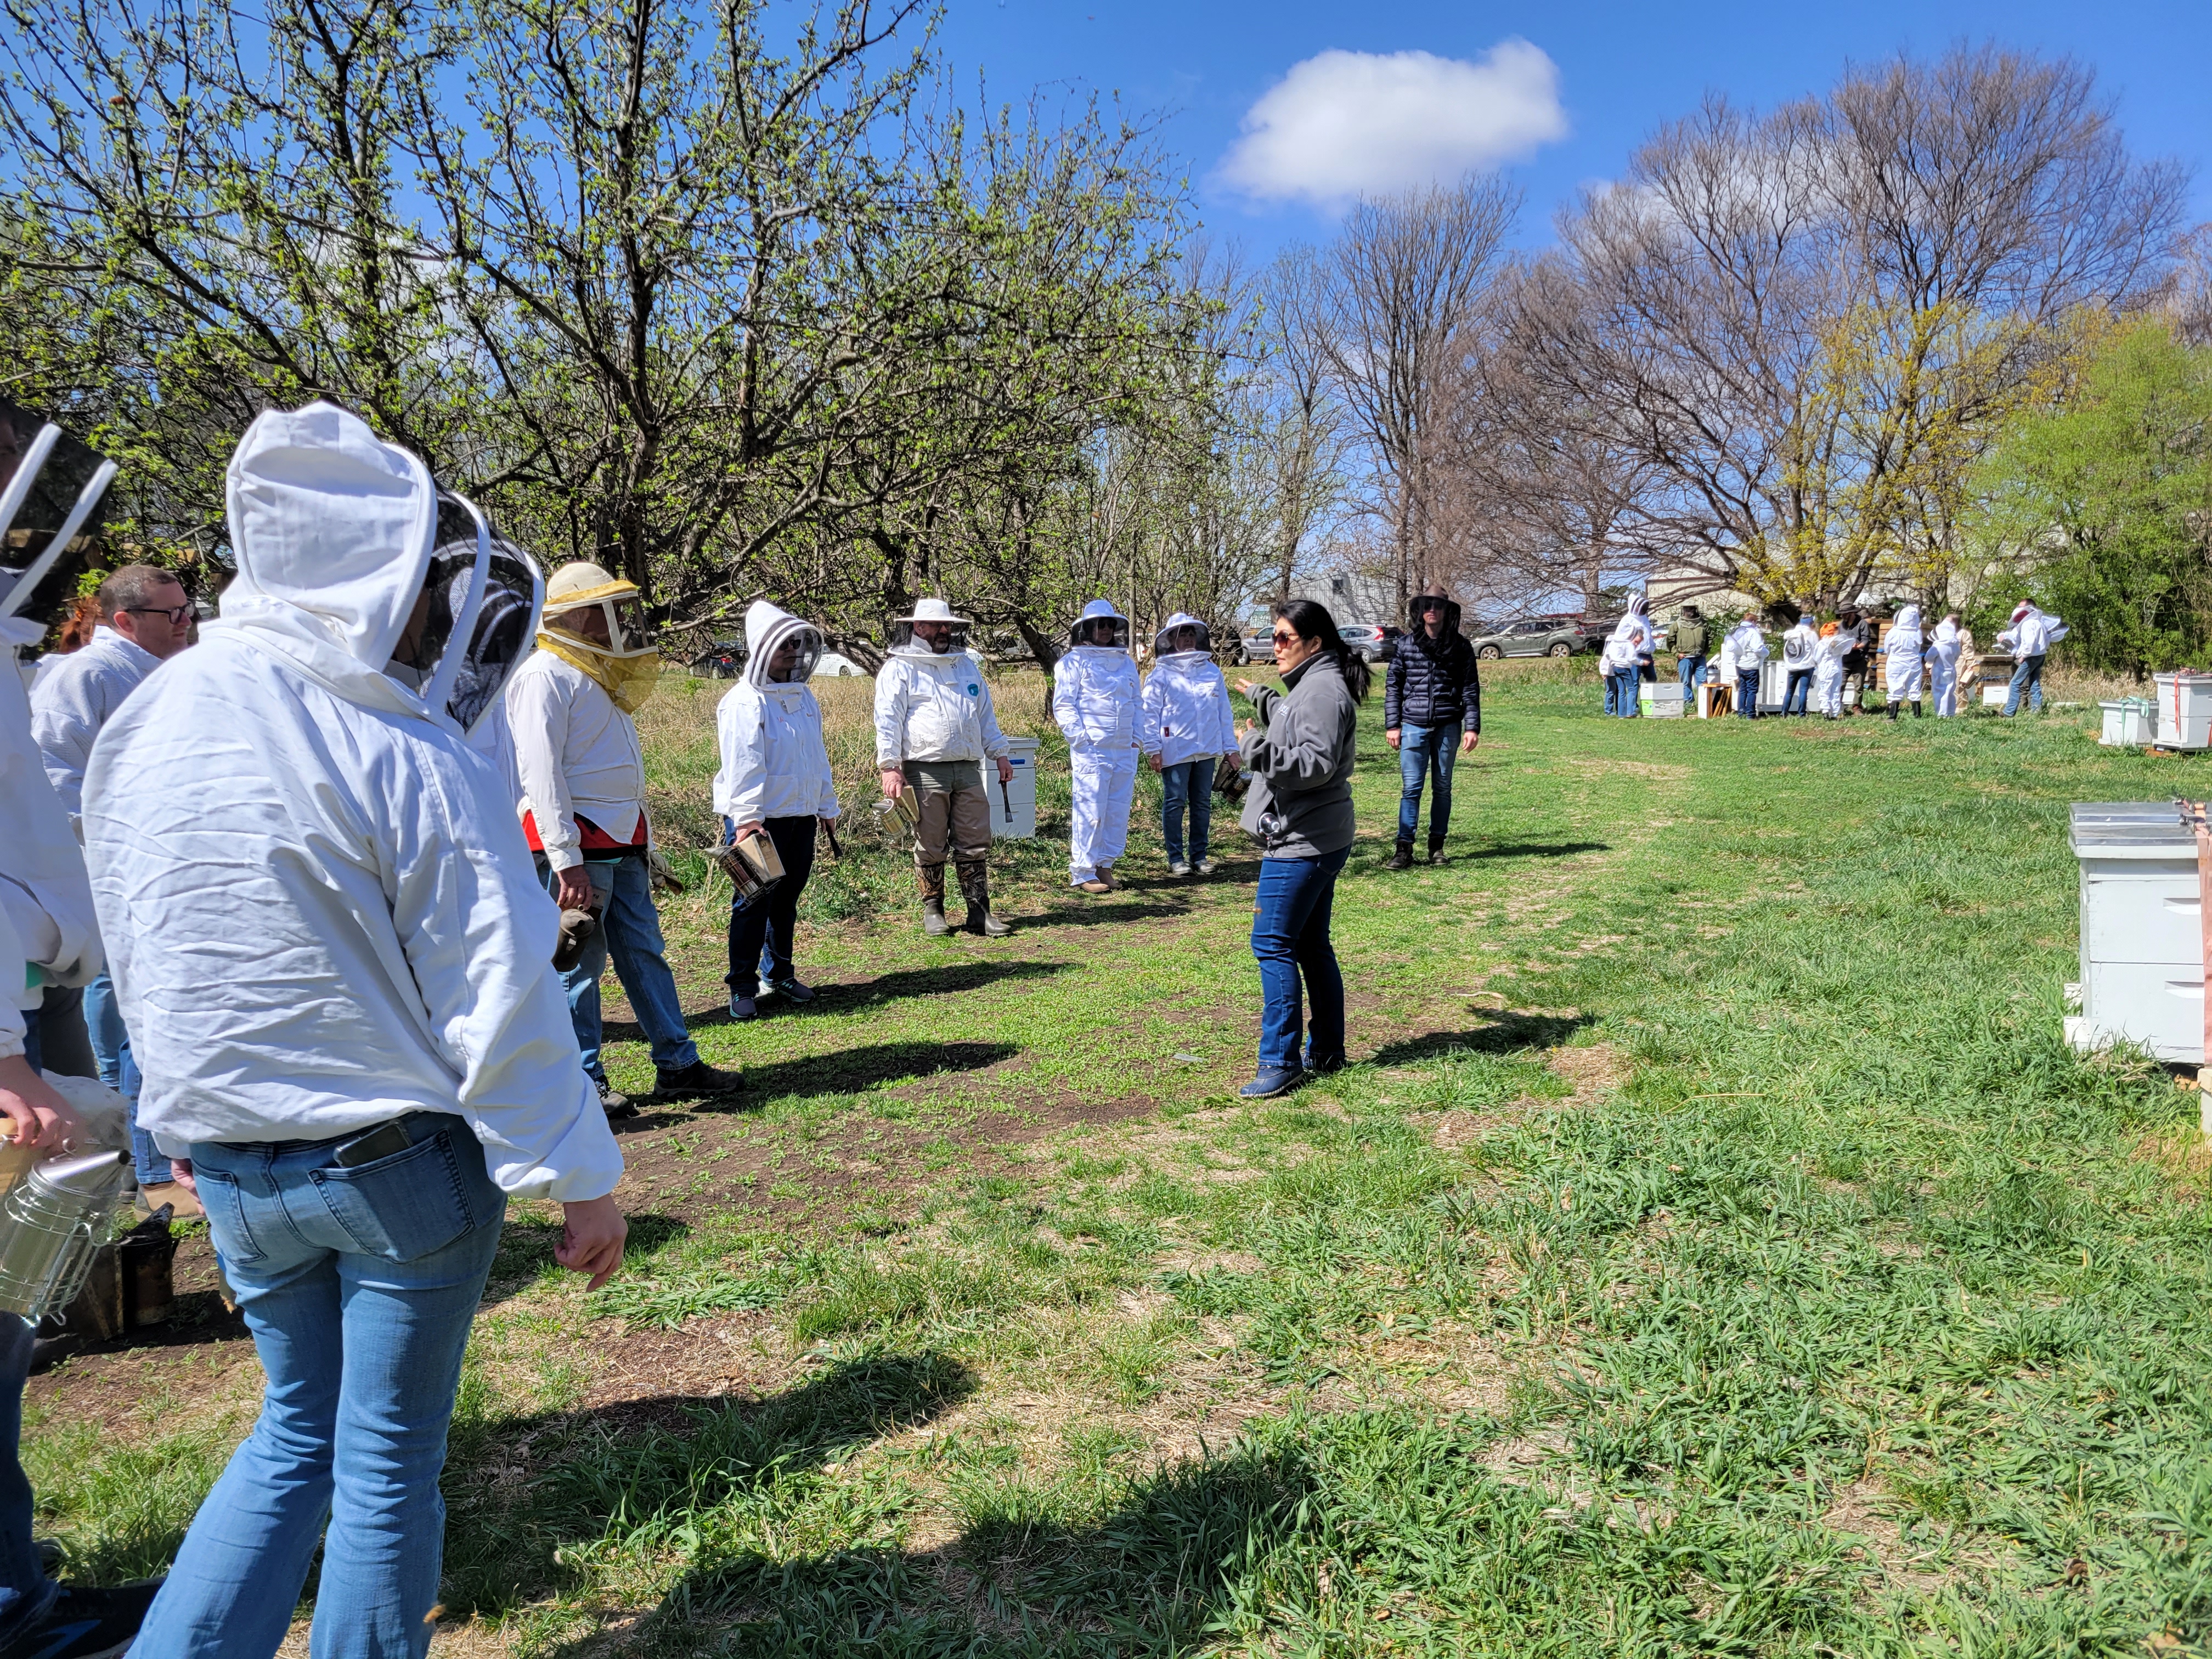 Beekeepers receive instructions at the open apiary location